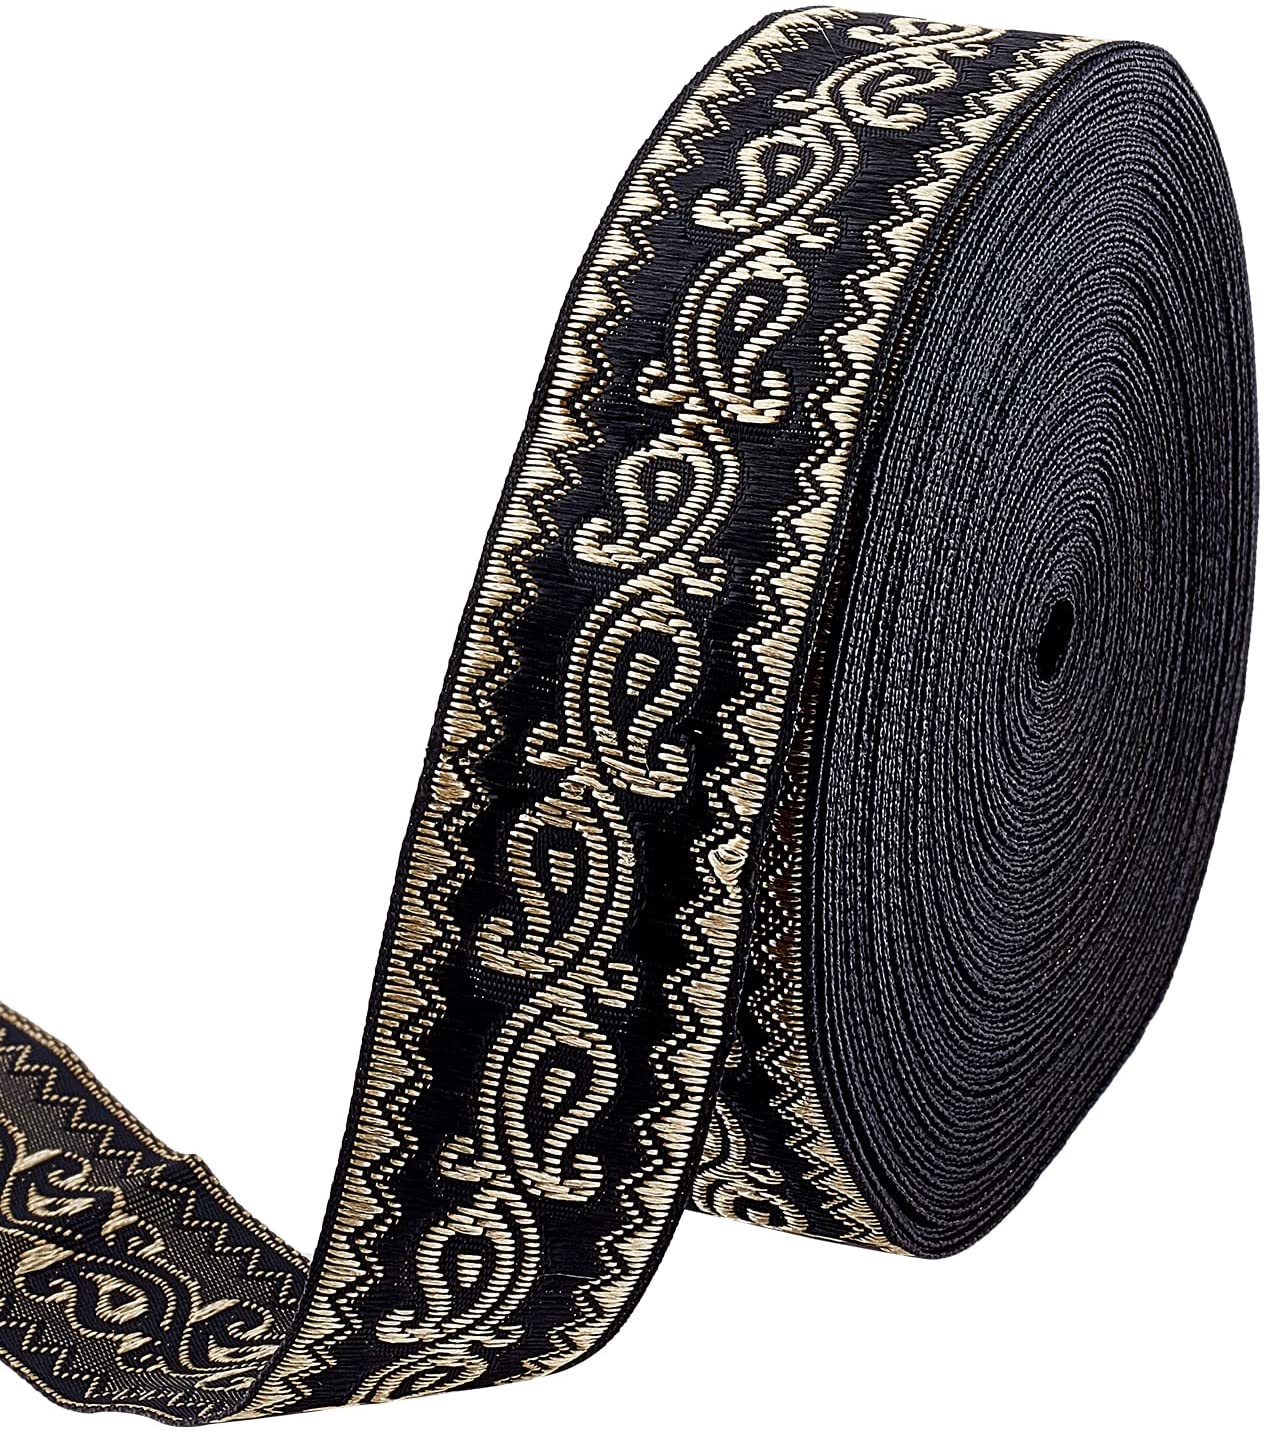 CRASPIRE 11 Yard Black Vintage Jacquard Ribbon Ethnic Style Floral Woven  Trim 1 inch Jacquard Gold Vine on Ribbon Trim for DIY Sewing Crafting Home  Decor, Gift Wrapping hat Bands